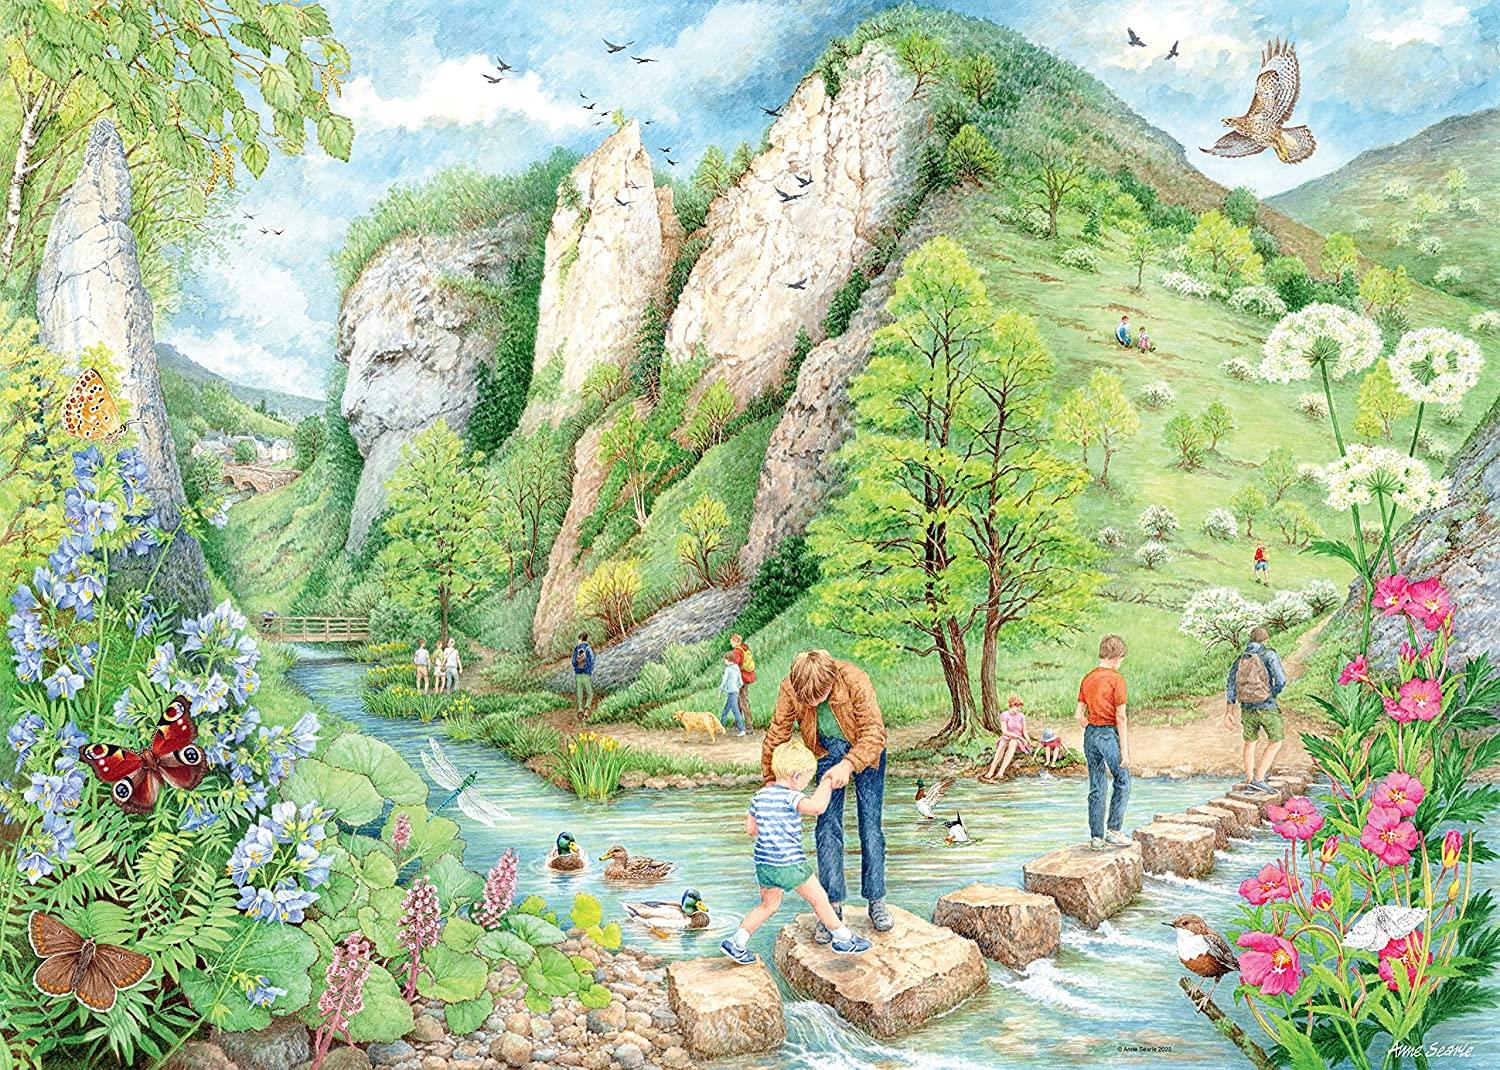 Ravensburger Walking World - Dovedale Jigsaw Puzzle (1000 Pieces)